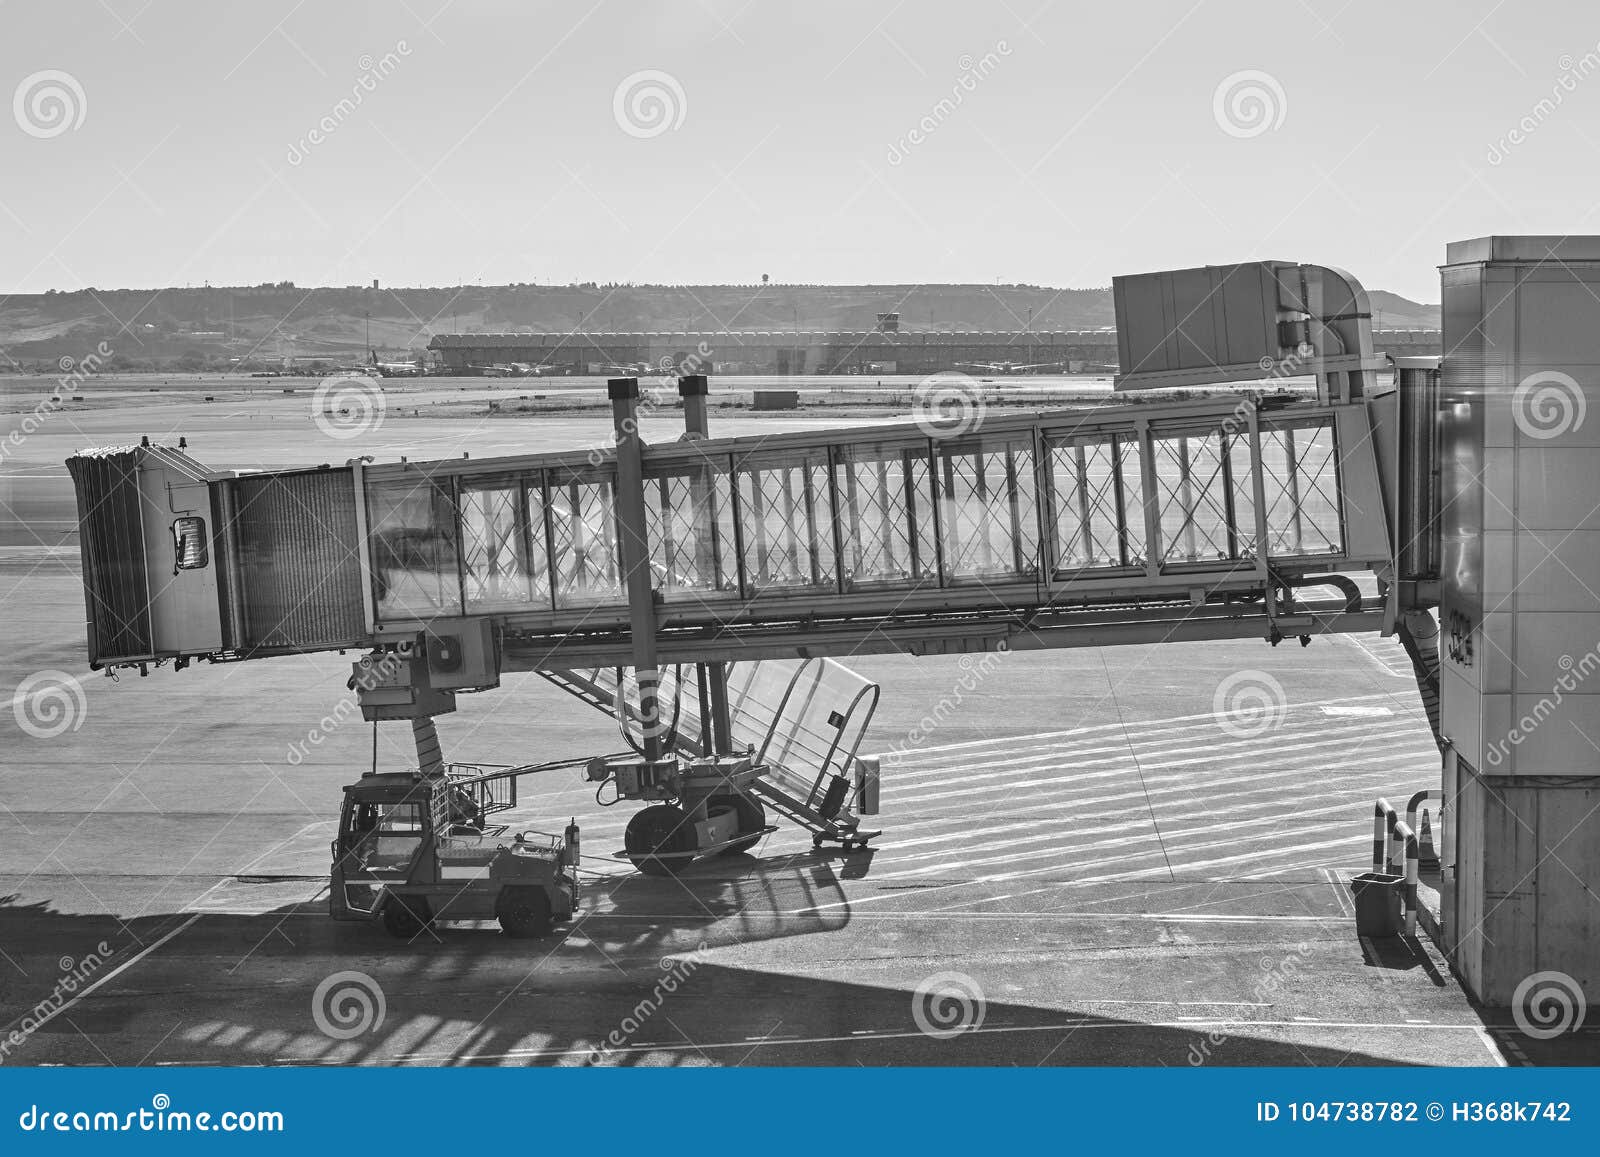 Airport Runaway Area with Finger. Air Transport. Horizontal Stock Photo ...